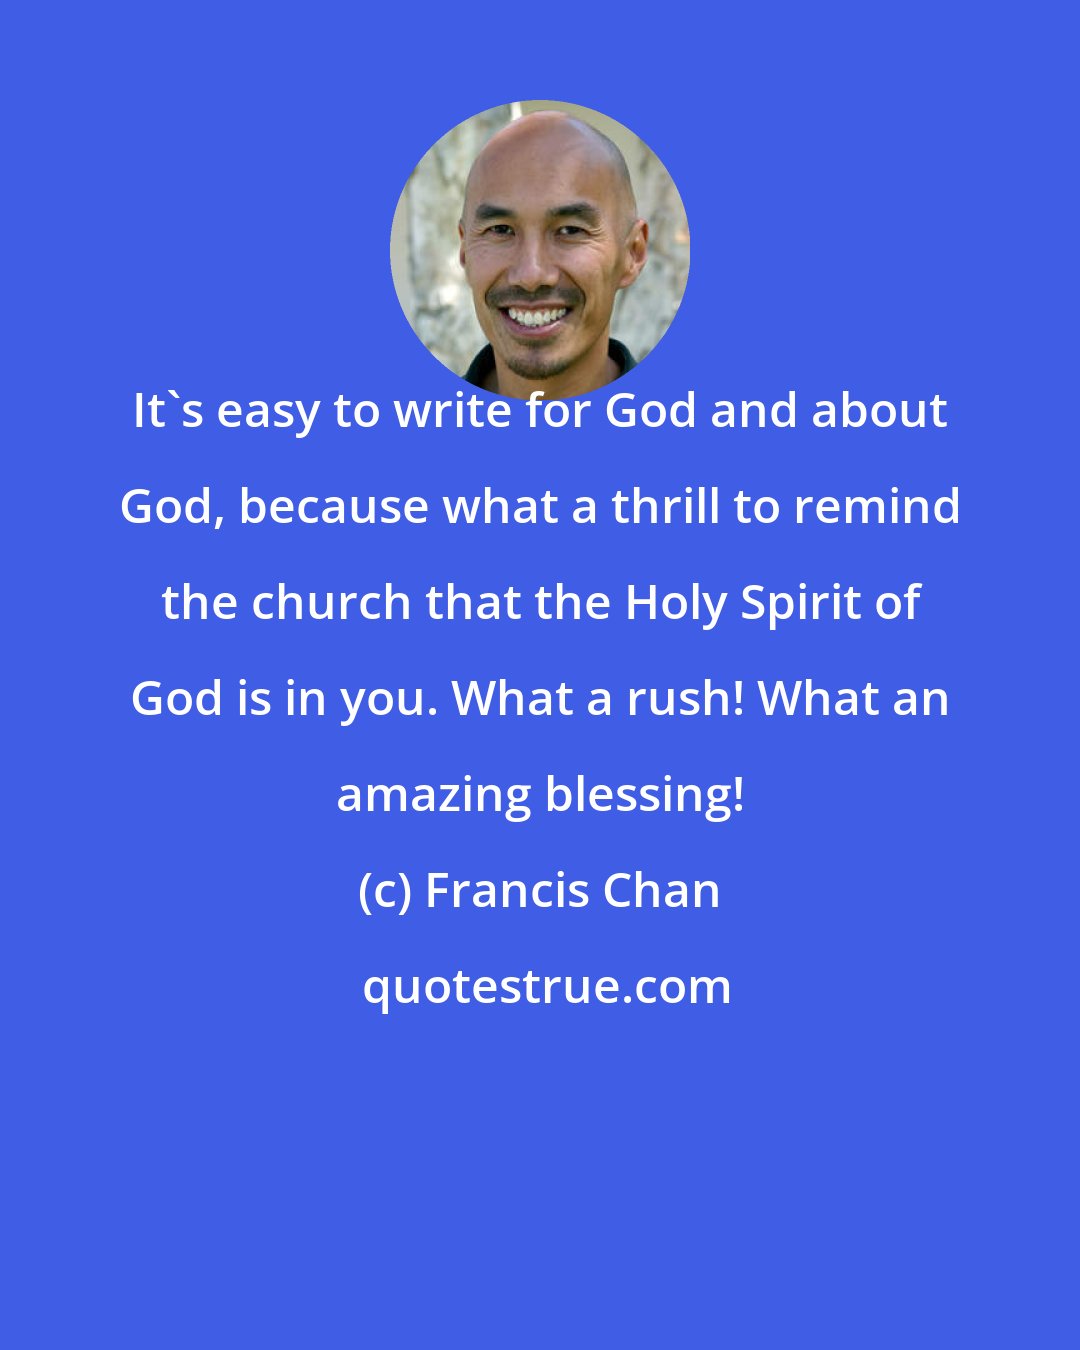 Francis Chan: It's easy to write for God and about God, because what a thrill to remind the church that the Holy Spirit of God is in you. What a rush! What an amazing blessing!